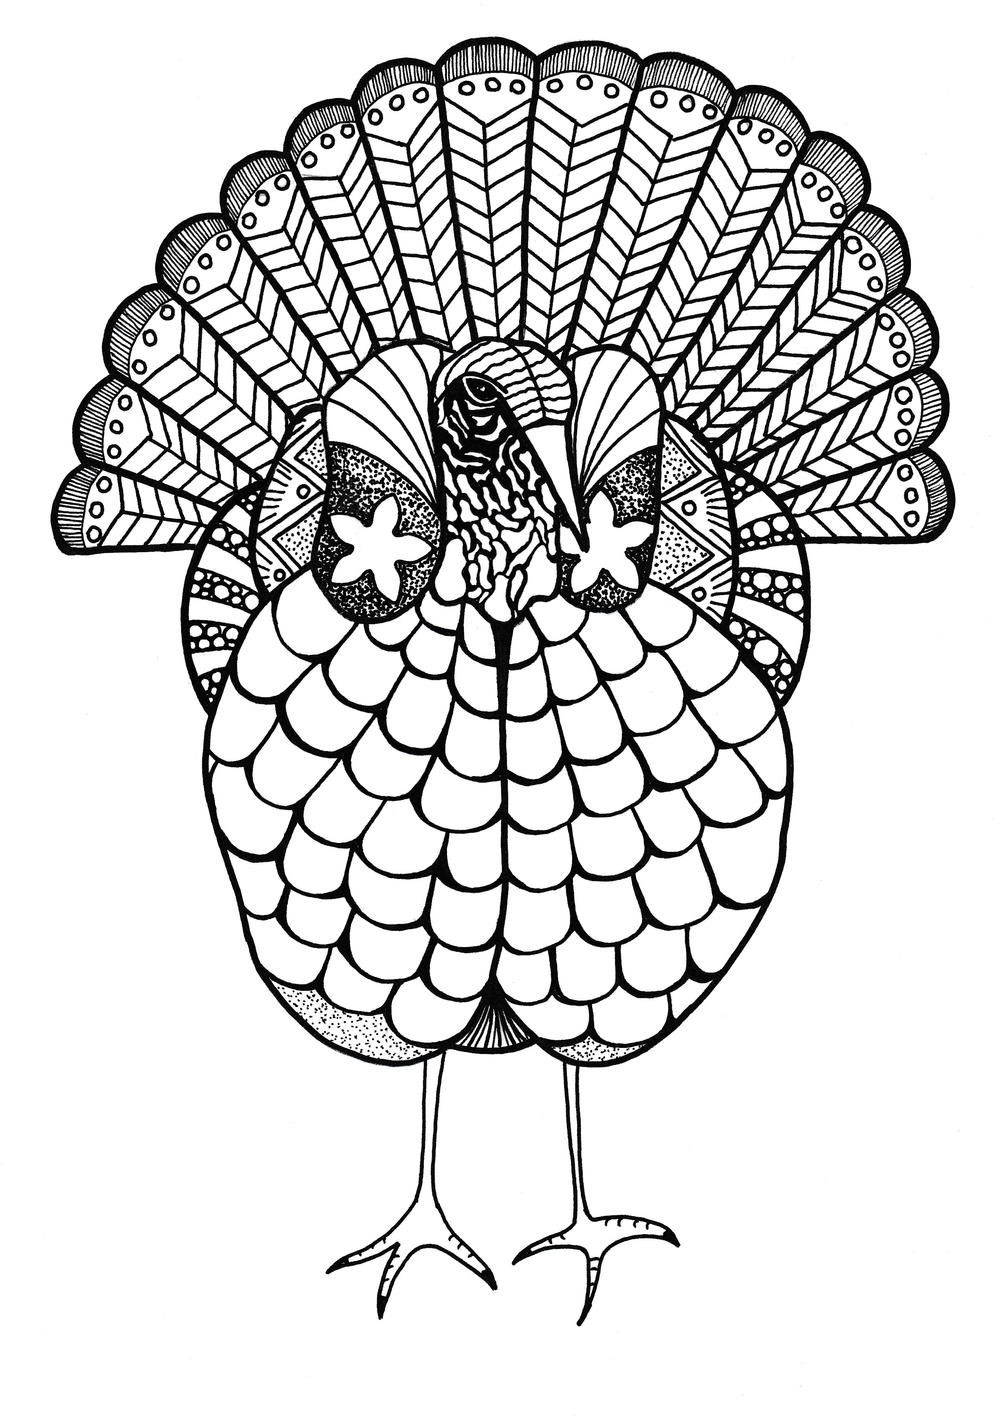 Thanksgiving Adult Coloring Pages
 Colorful Turkey Adult Coloring Page